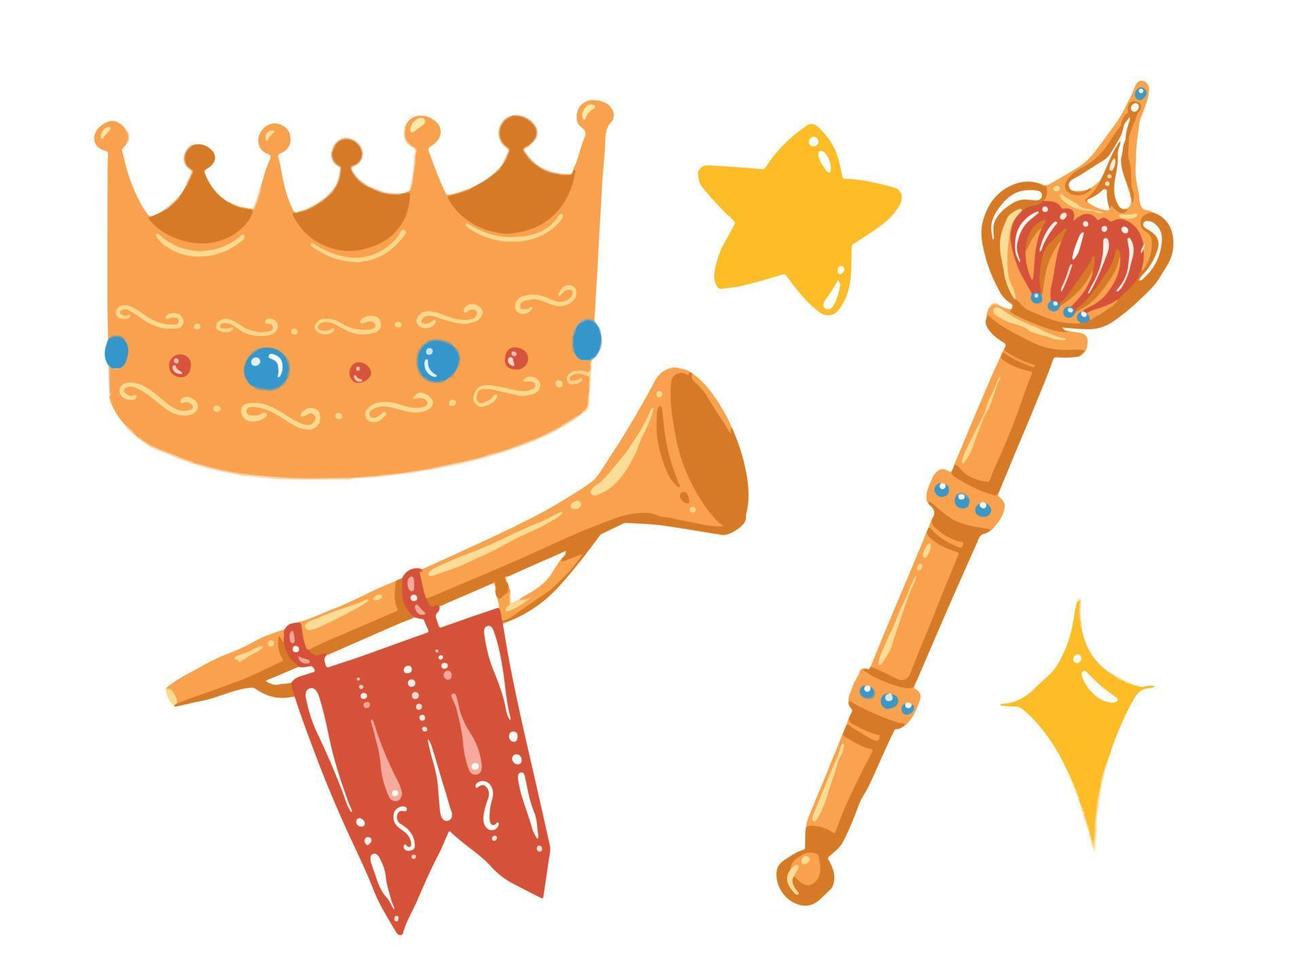 King's Attributes element drawings of queen or king crown, star, trumpet, staff to express glory and kingdom. Vector illustration set collection with flat art style.